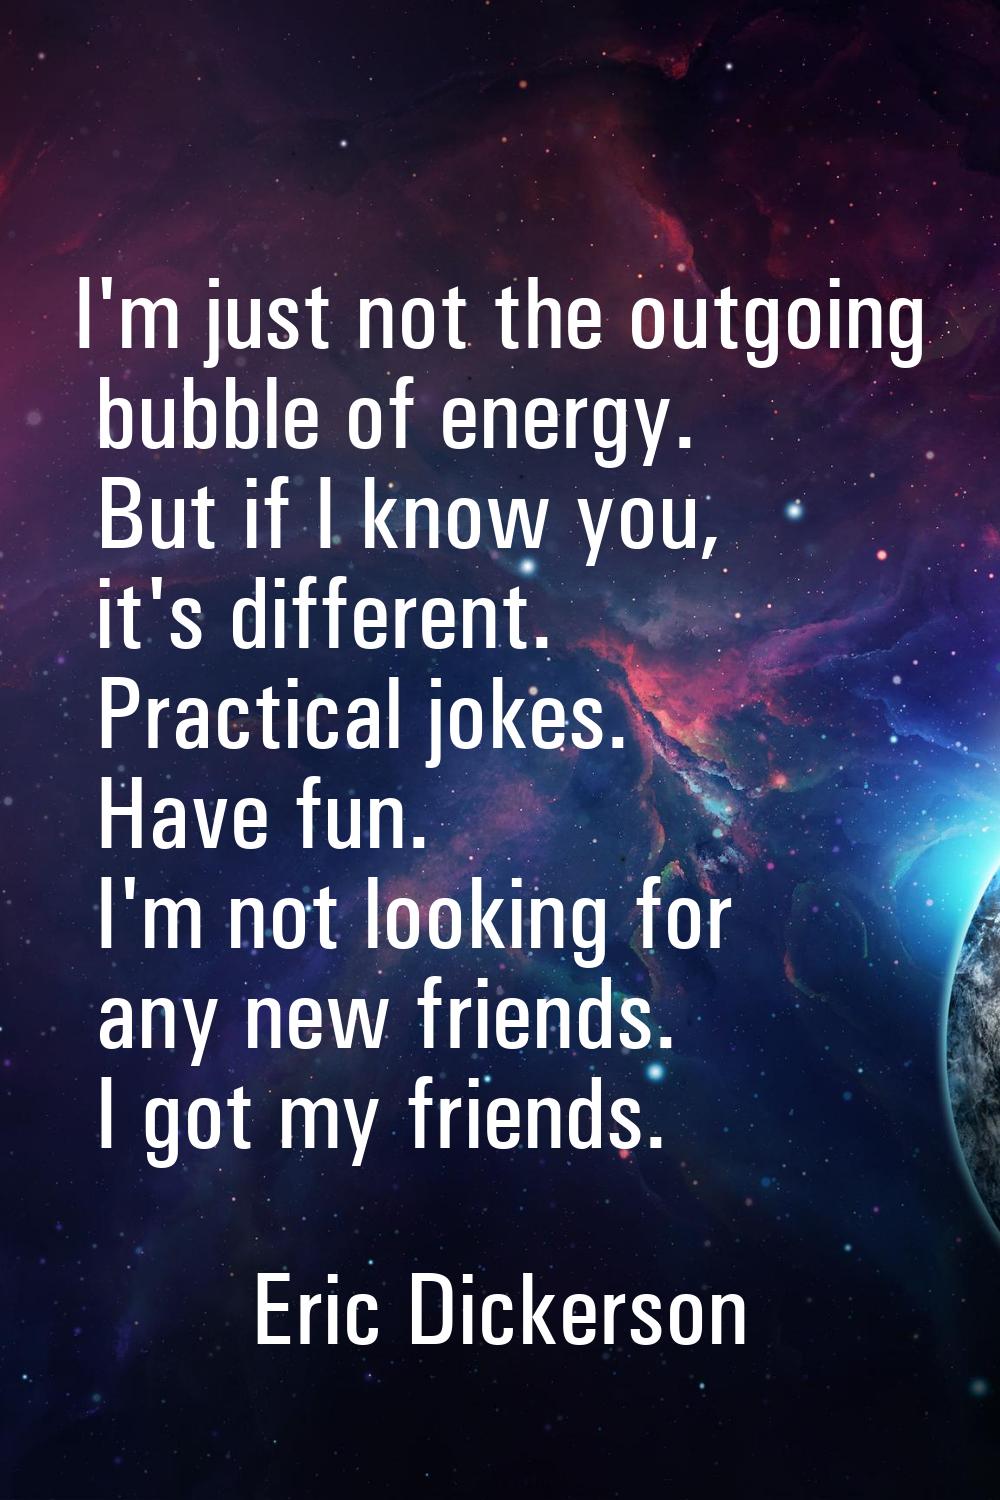 I'm just not the outgoing bubble of energy. But if I know you, it's different. Practical jokes. Hav